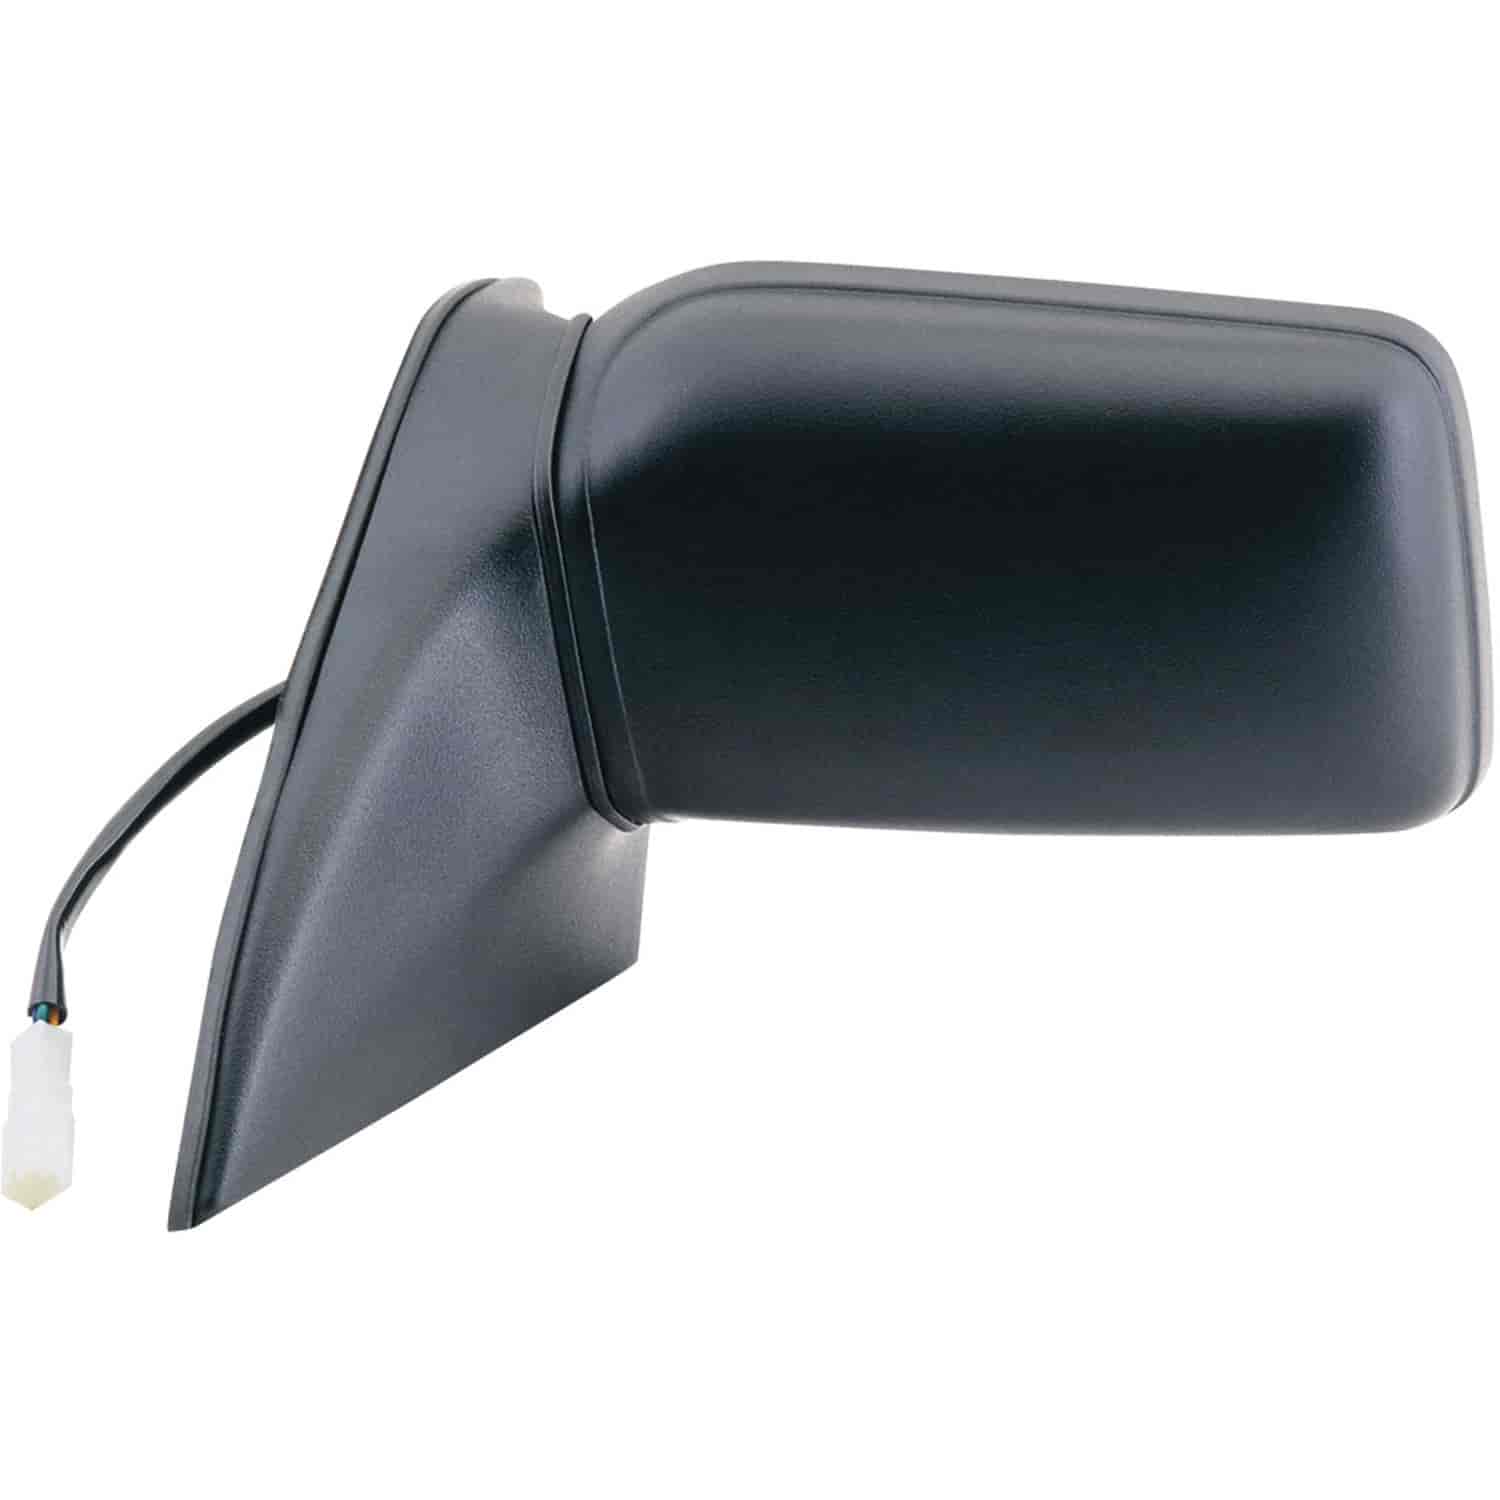 OEM Style Replacement mirror for 91-96 Ford Escort